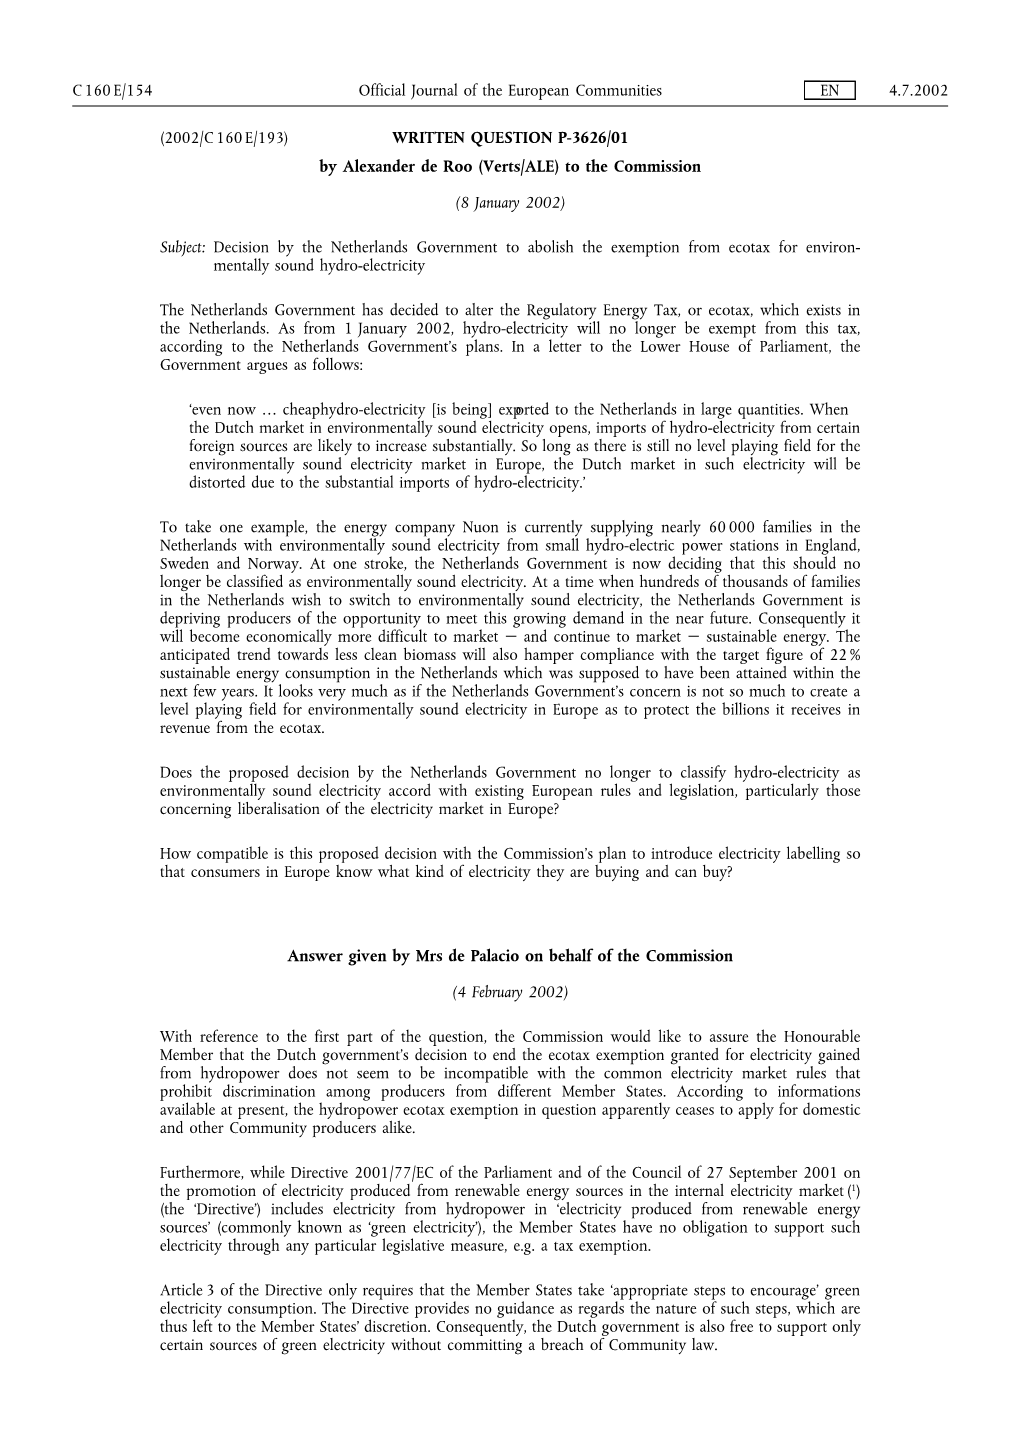 (2002/C 160 E/193) WRITTEN QUESTION P-3626/01 by Alexander De Roo (Verts/ALE) to the Commission